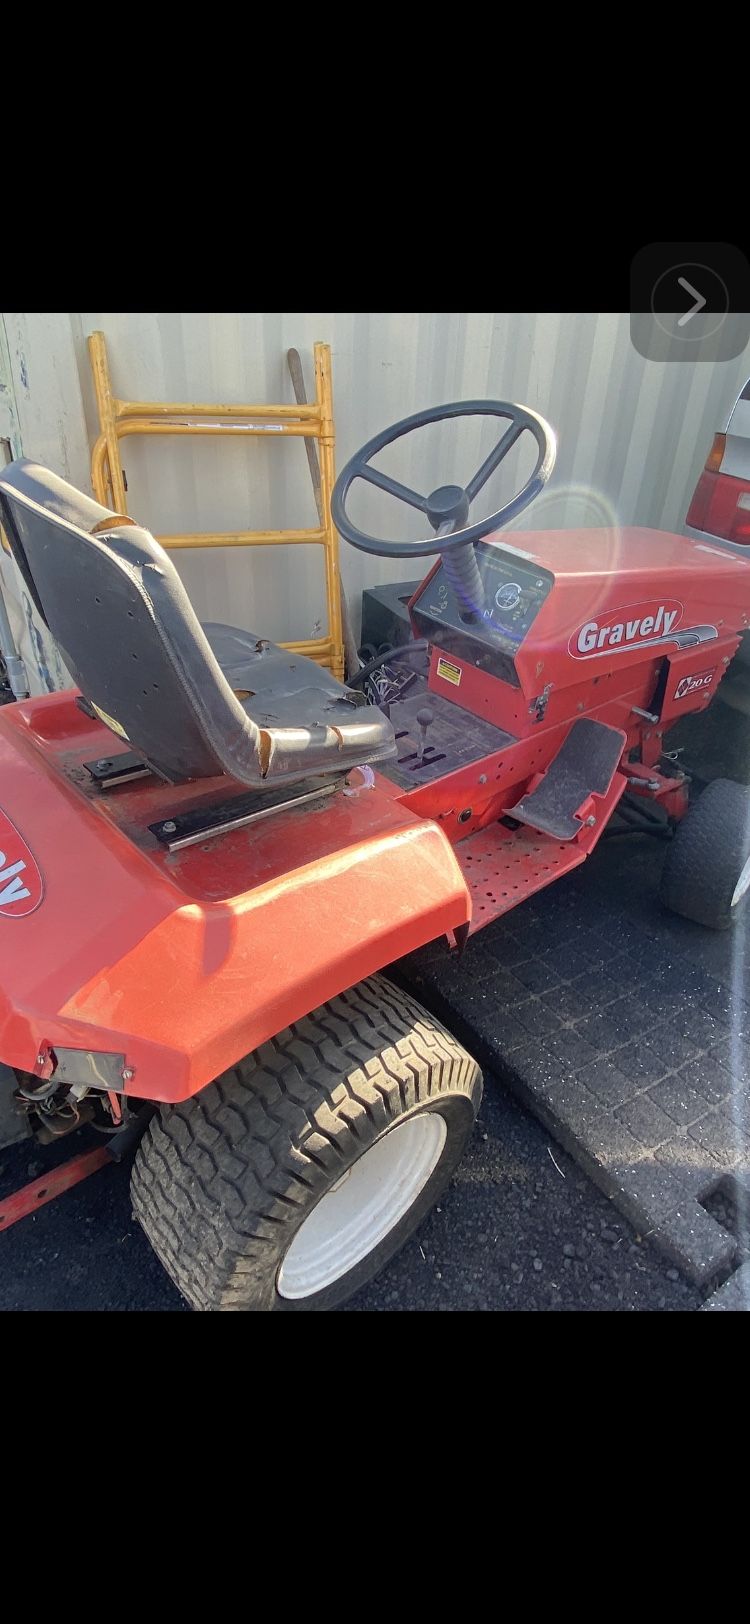 Gravely 20g Tractor/Mower With Multiple Attachmements For Snow For Sale!!